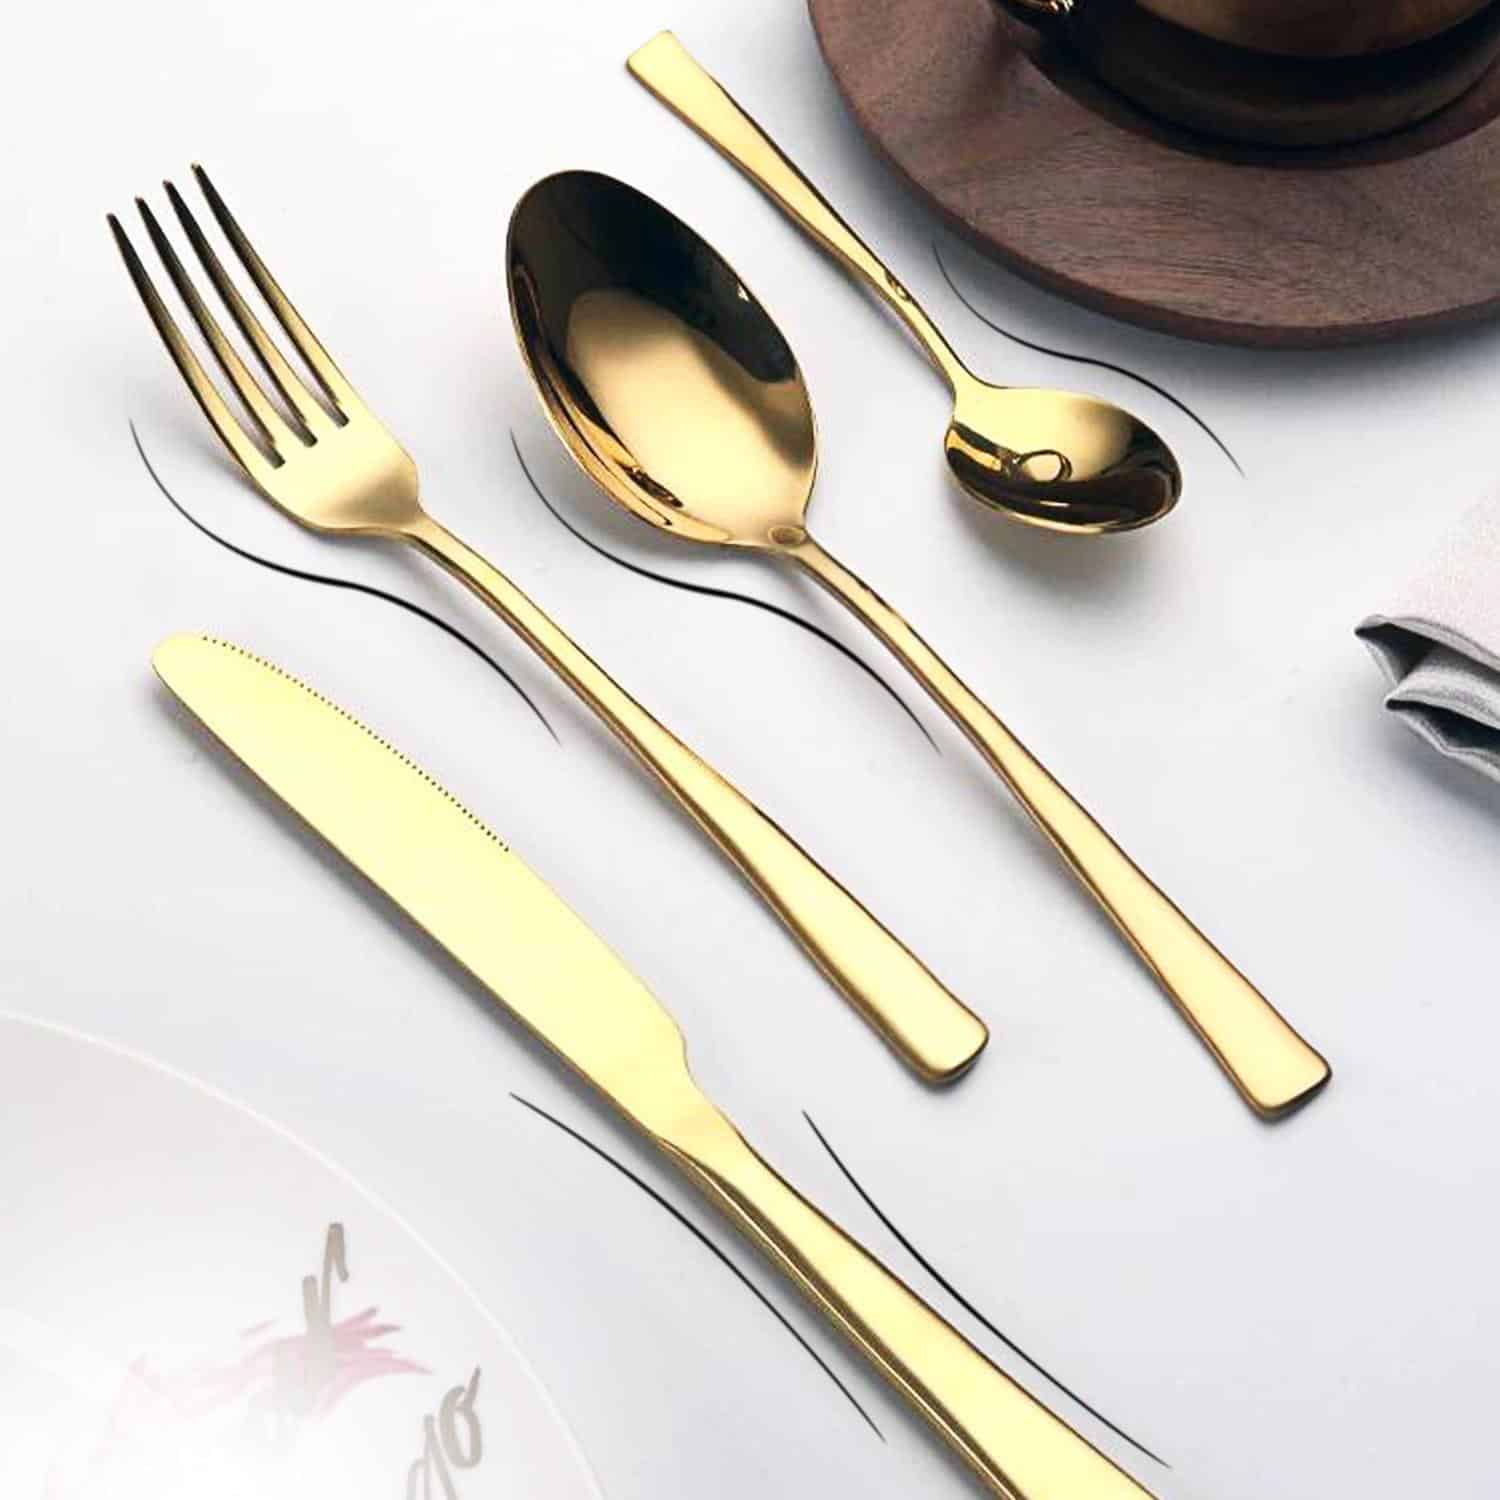 24PCS Gold Cutlery Dinner Set Tableware Cutlery Set Dishes Knives Forks Spoons Western Kitchen Dinnerware Stainless Steel Home